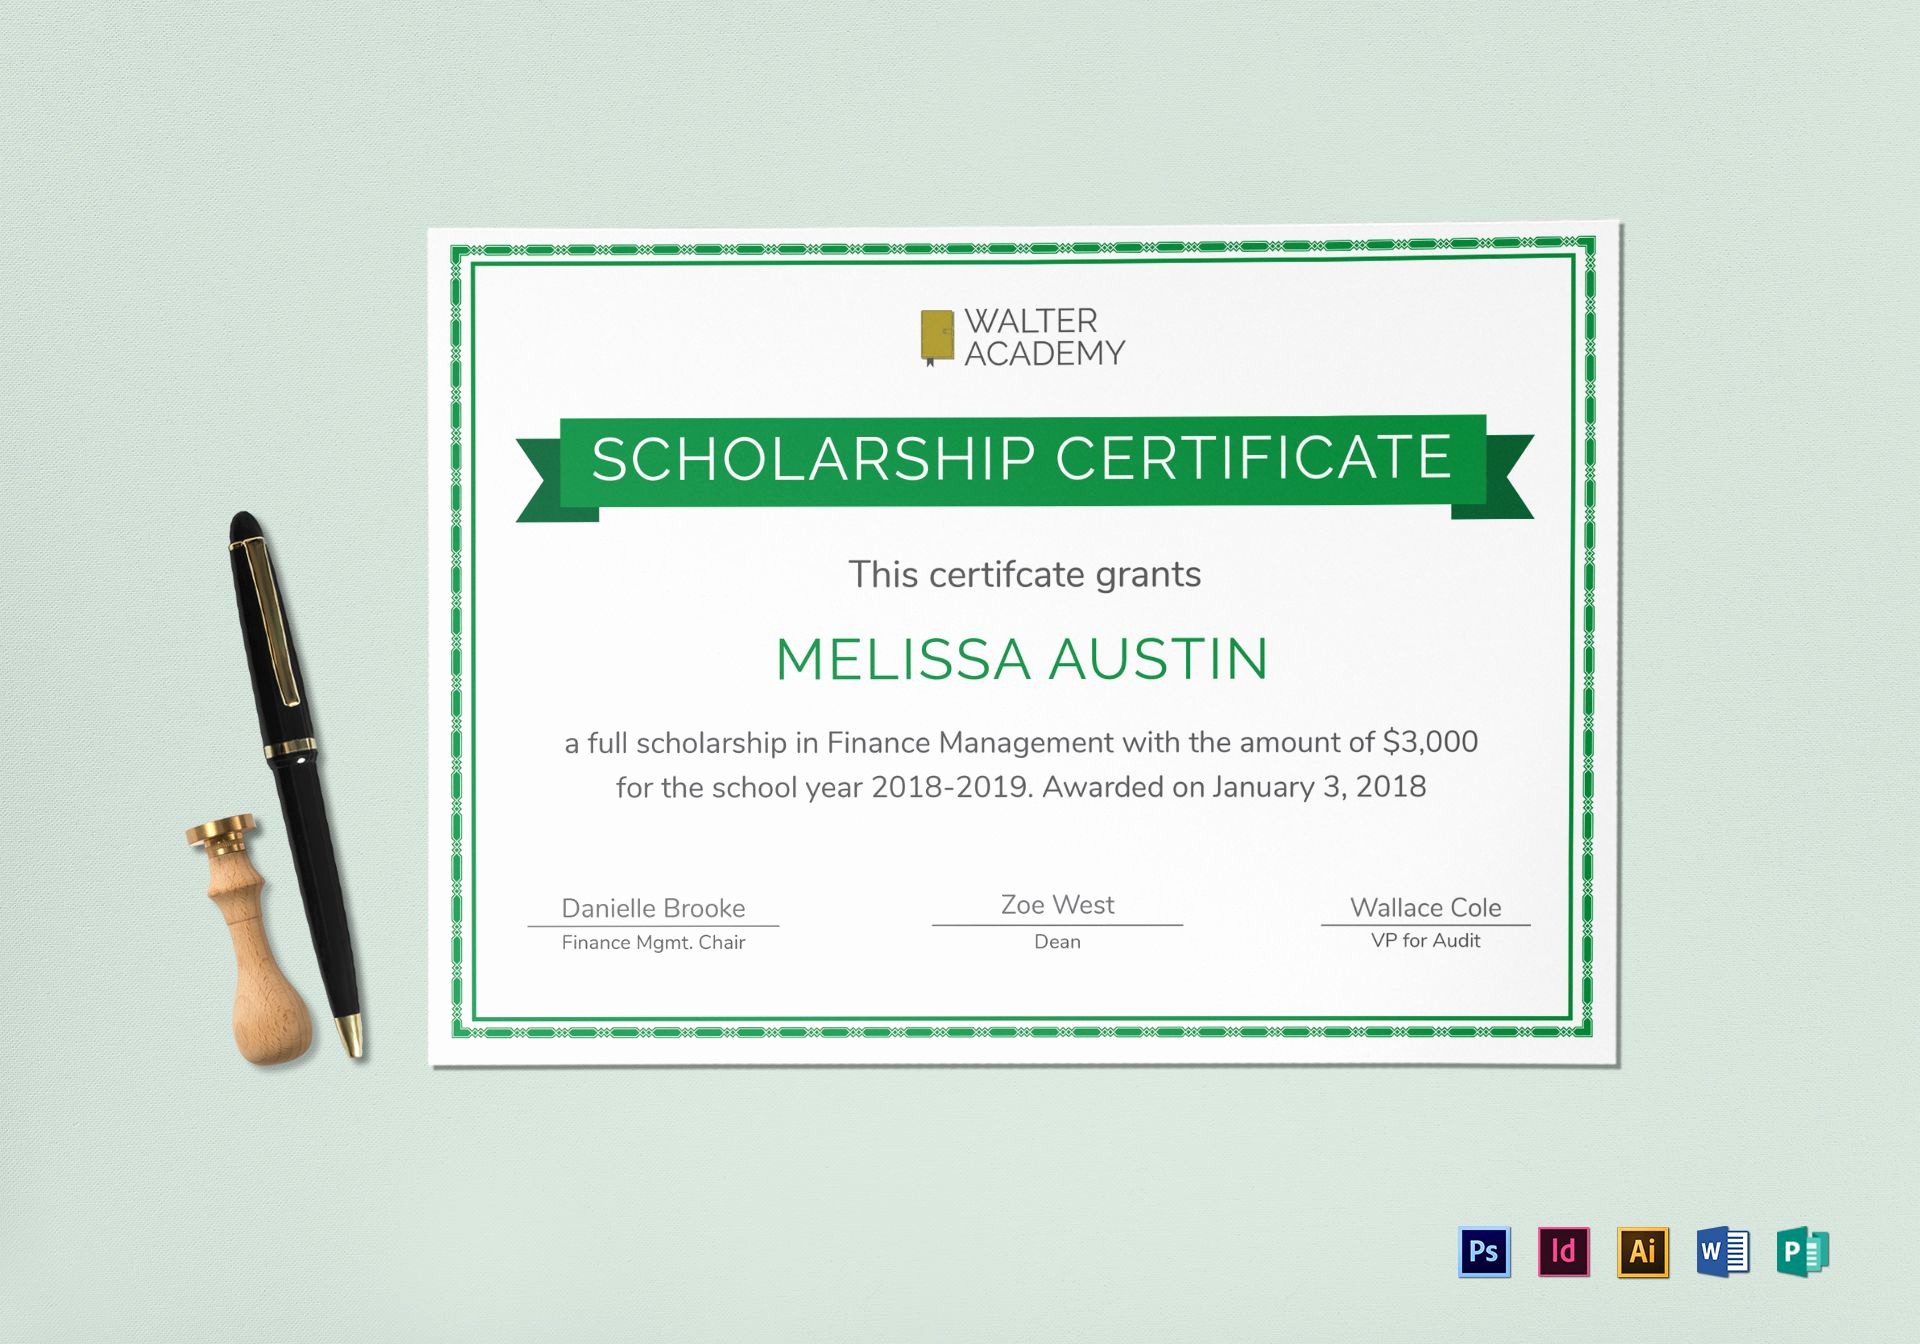 Scholarship Certificate Template for Word Lovely Scholarship Certificate Design Template In Psd Word